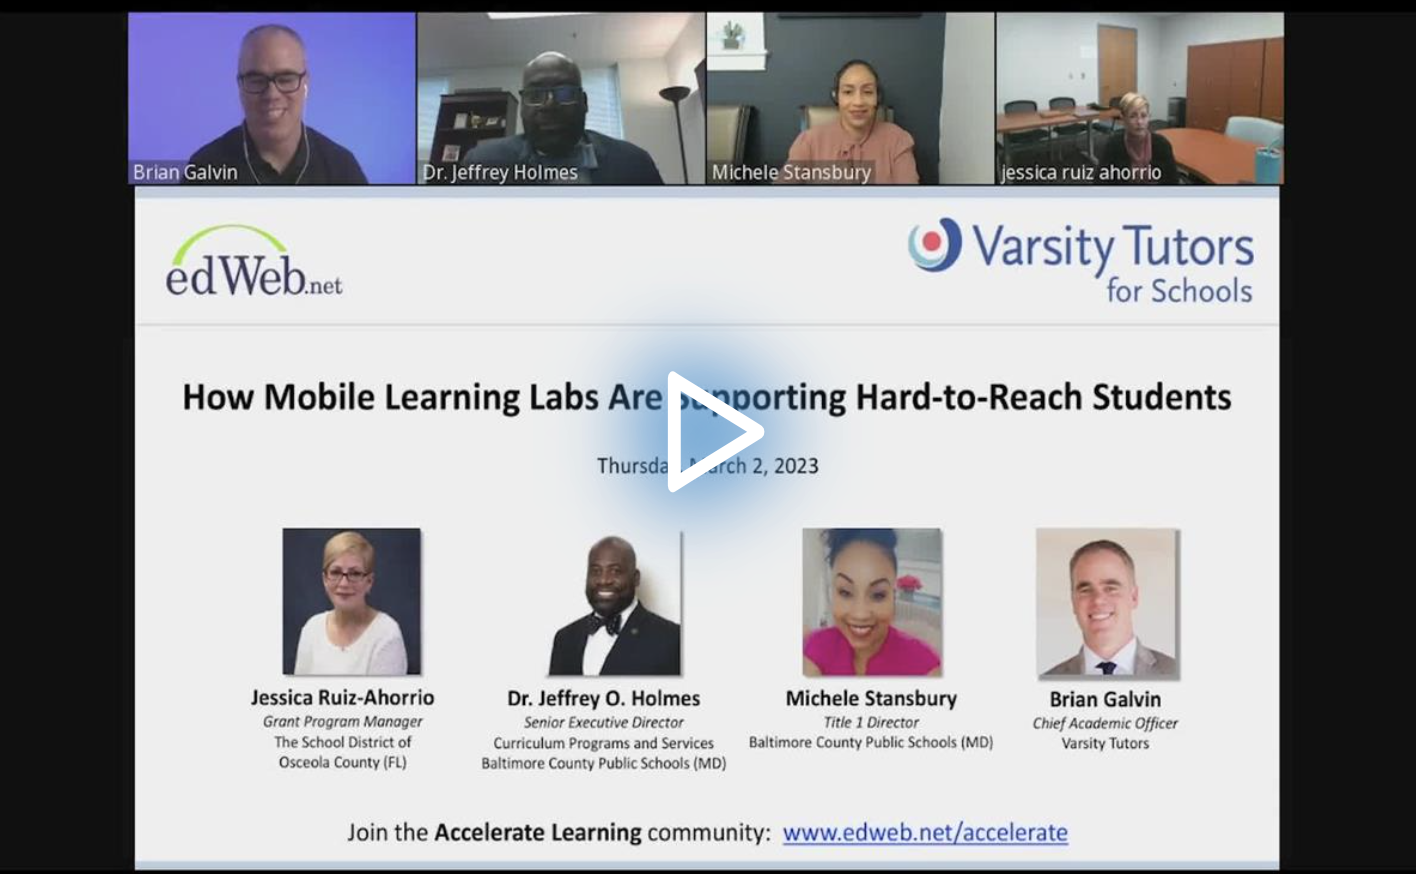 How Mobile Learning Labs Are Supporting Hard-to-Reach Students edLeader Panel recording screenshot